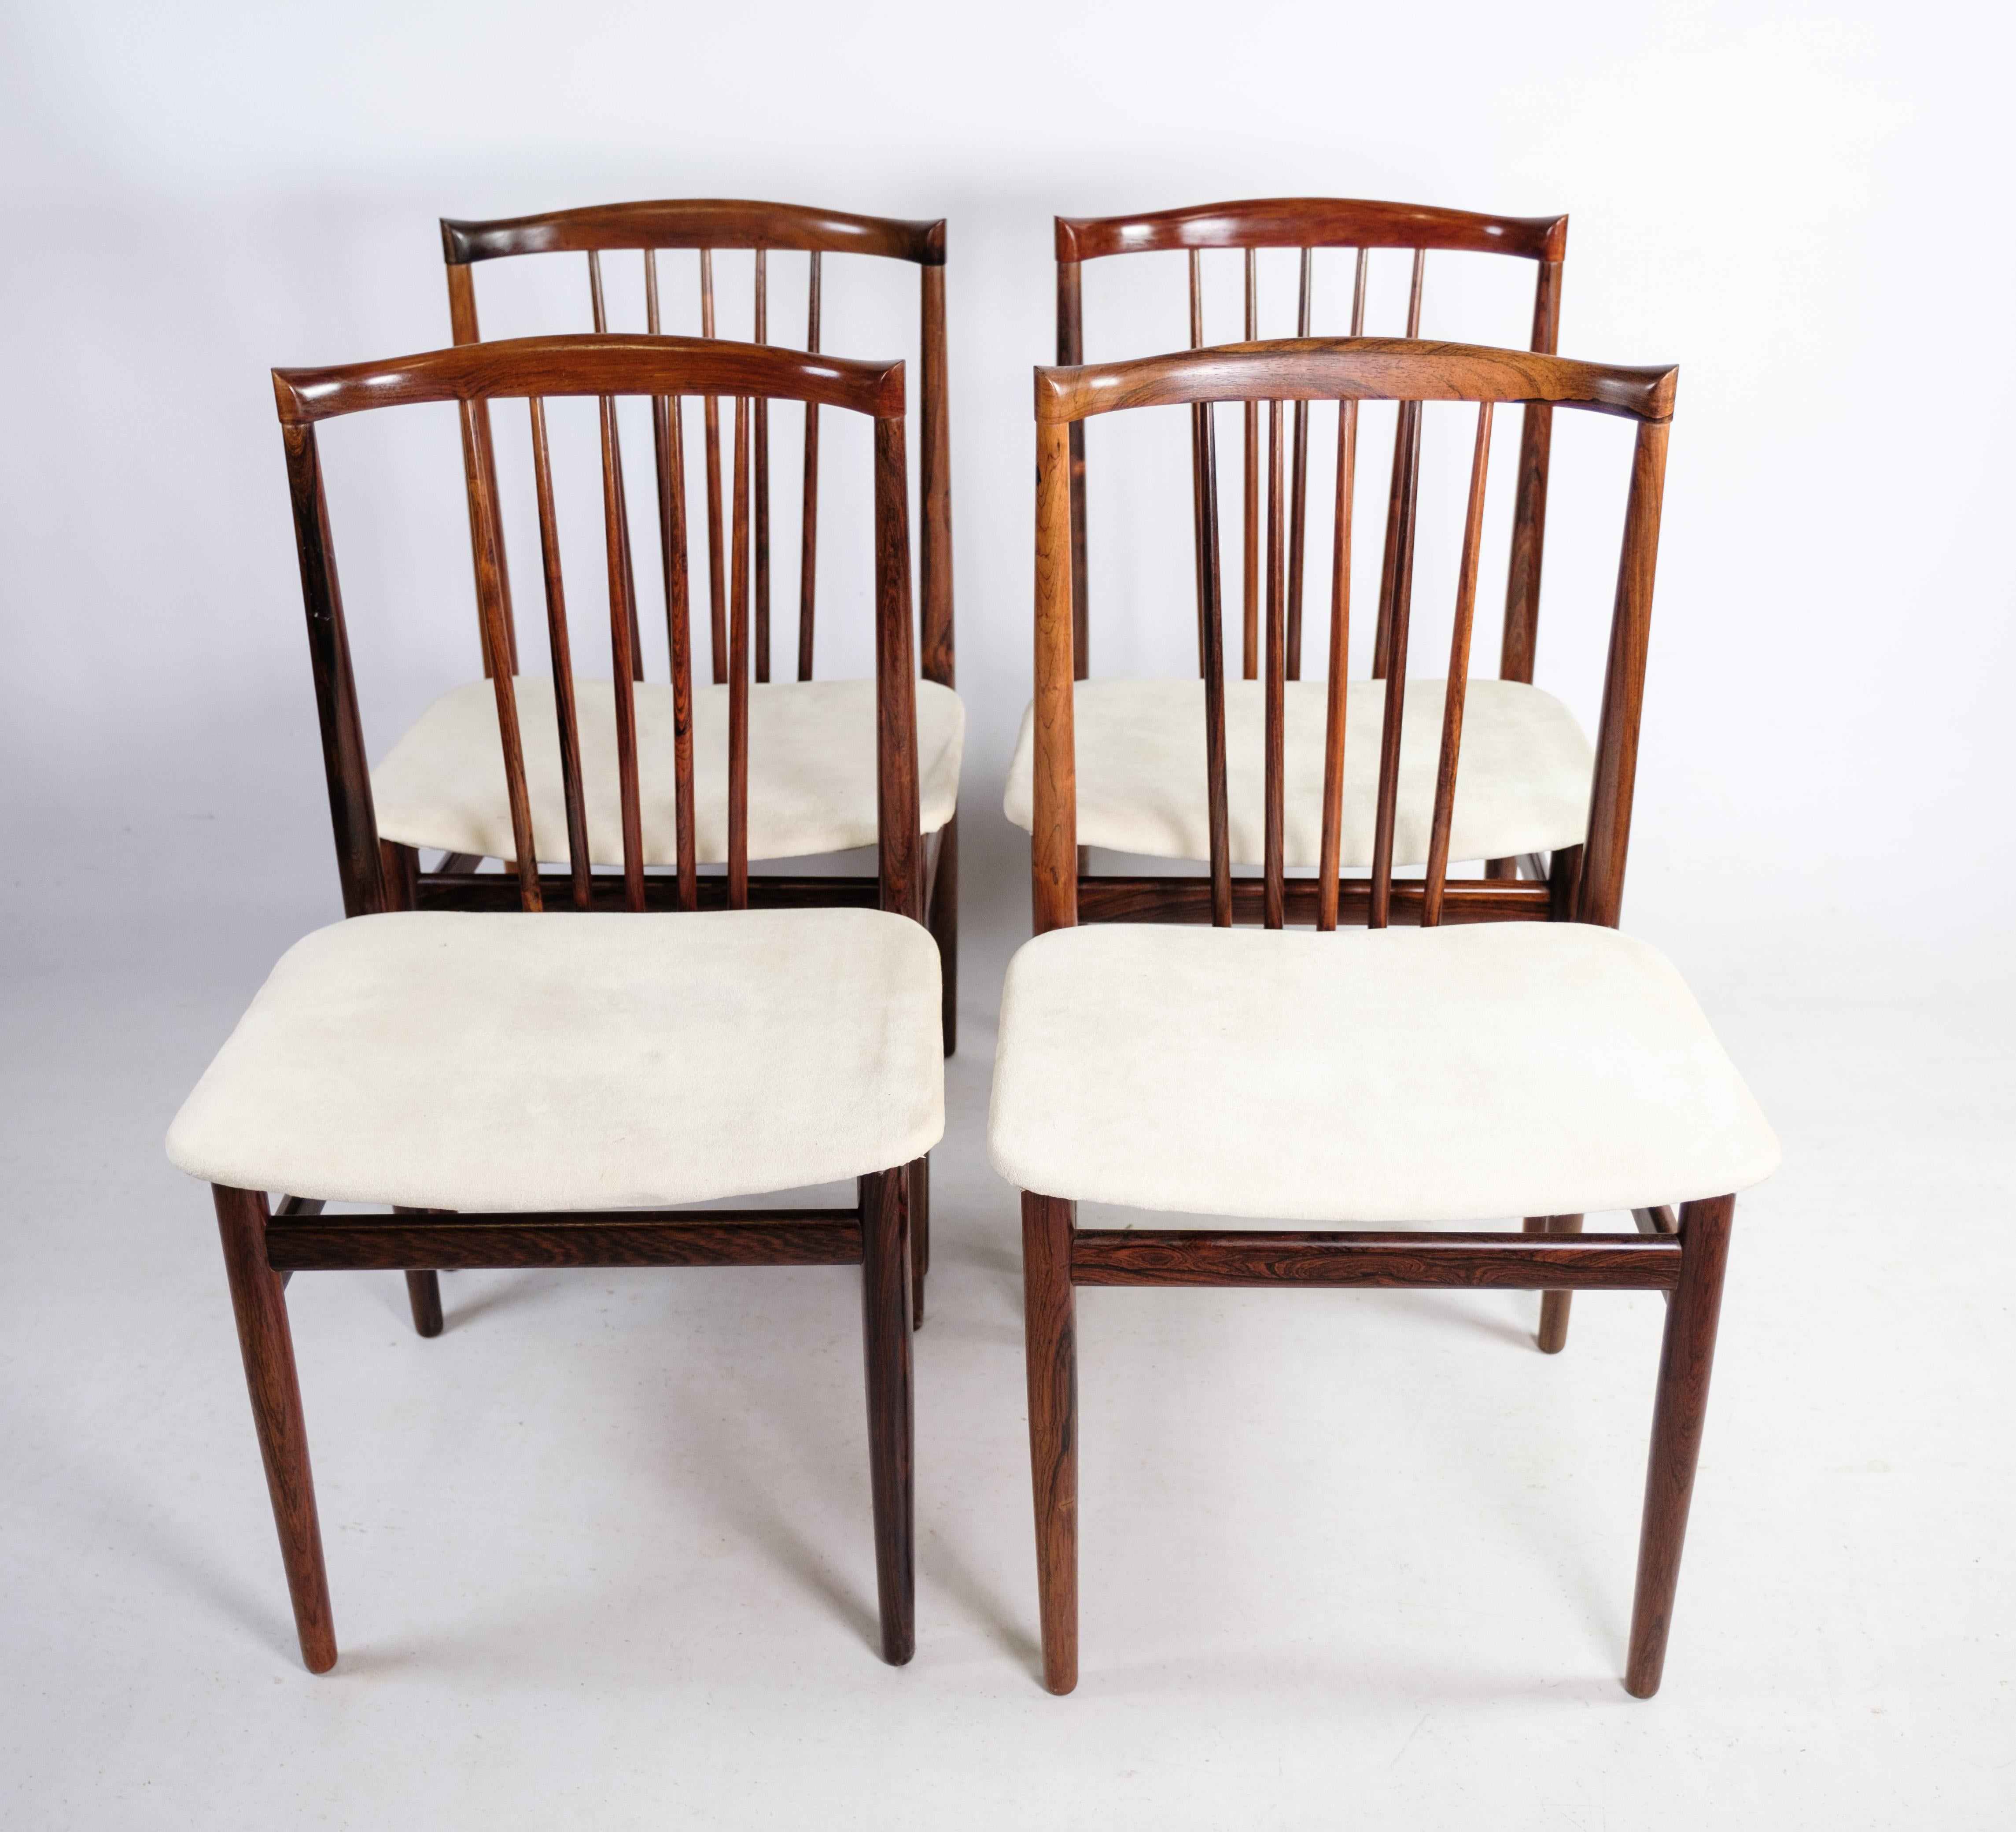 This set of four dining chairs, designed by Henning Sørensen in 1968 and crafted from rosewood, epitomizes the elegance and sophistication of mid-century Danish design. With their timeless aesthetic and quality construction, these chairs are sure to